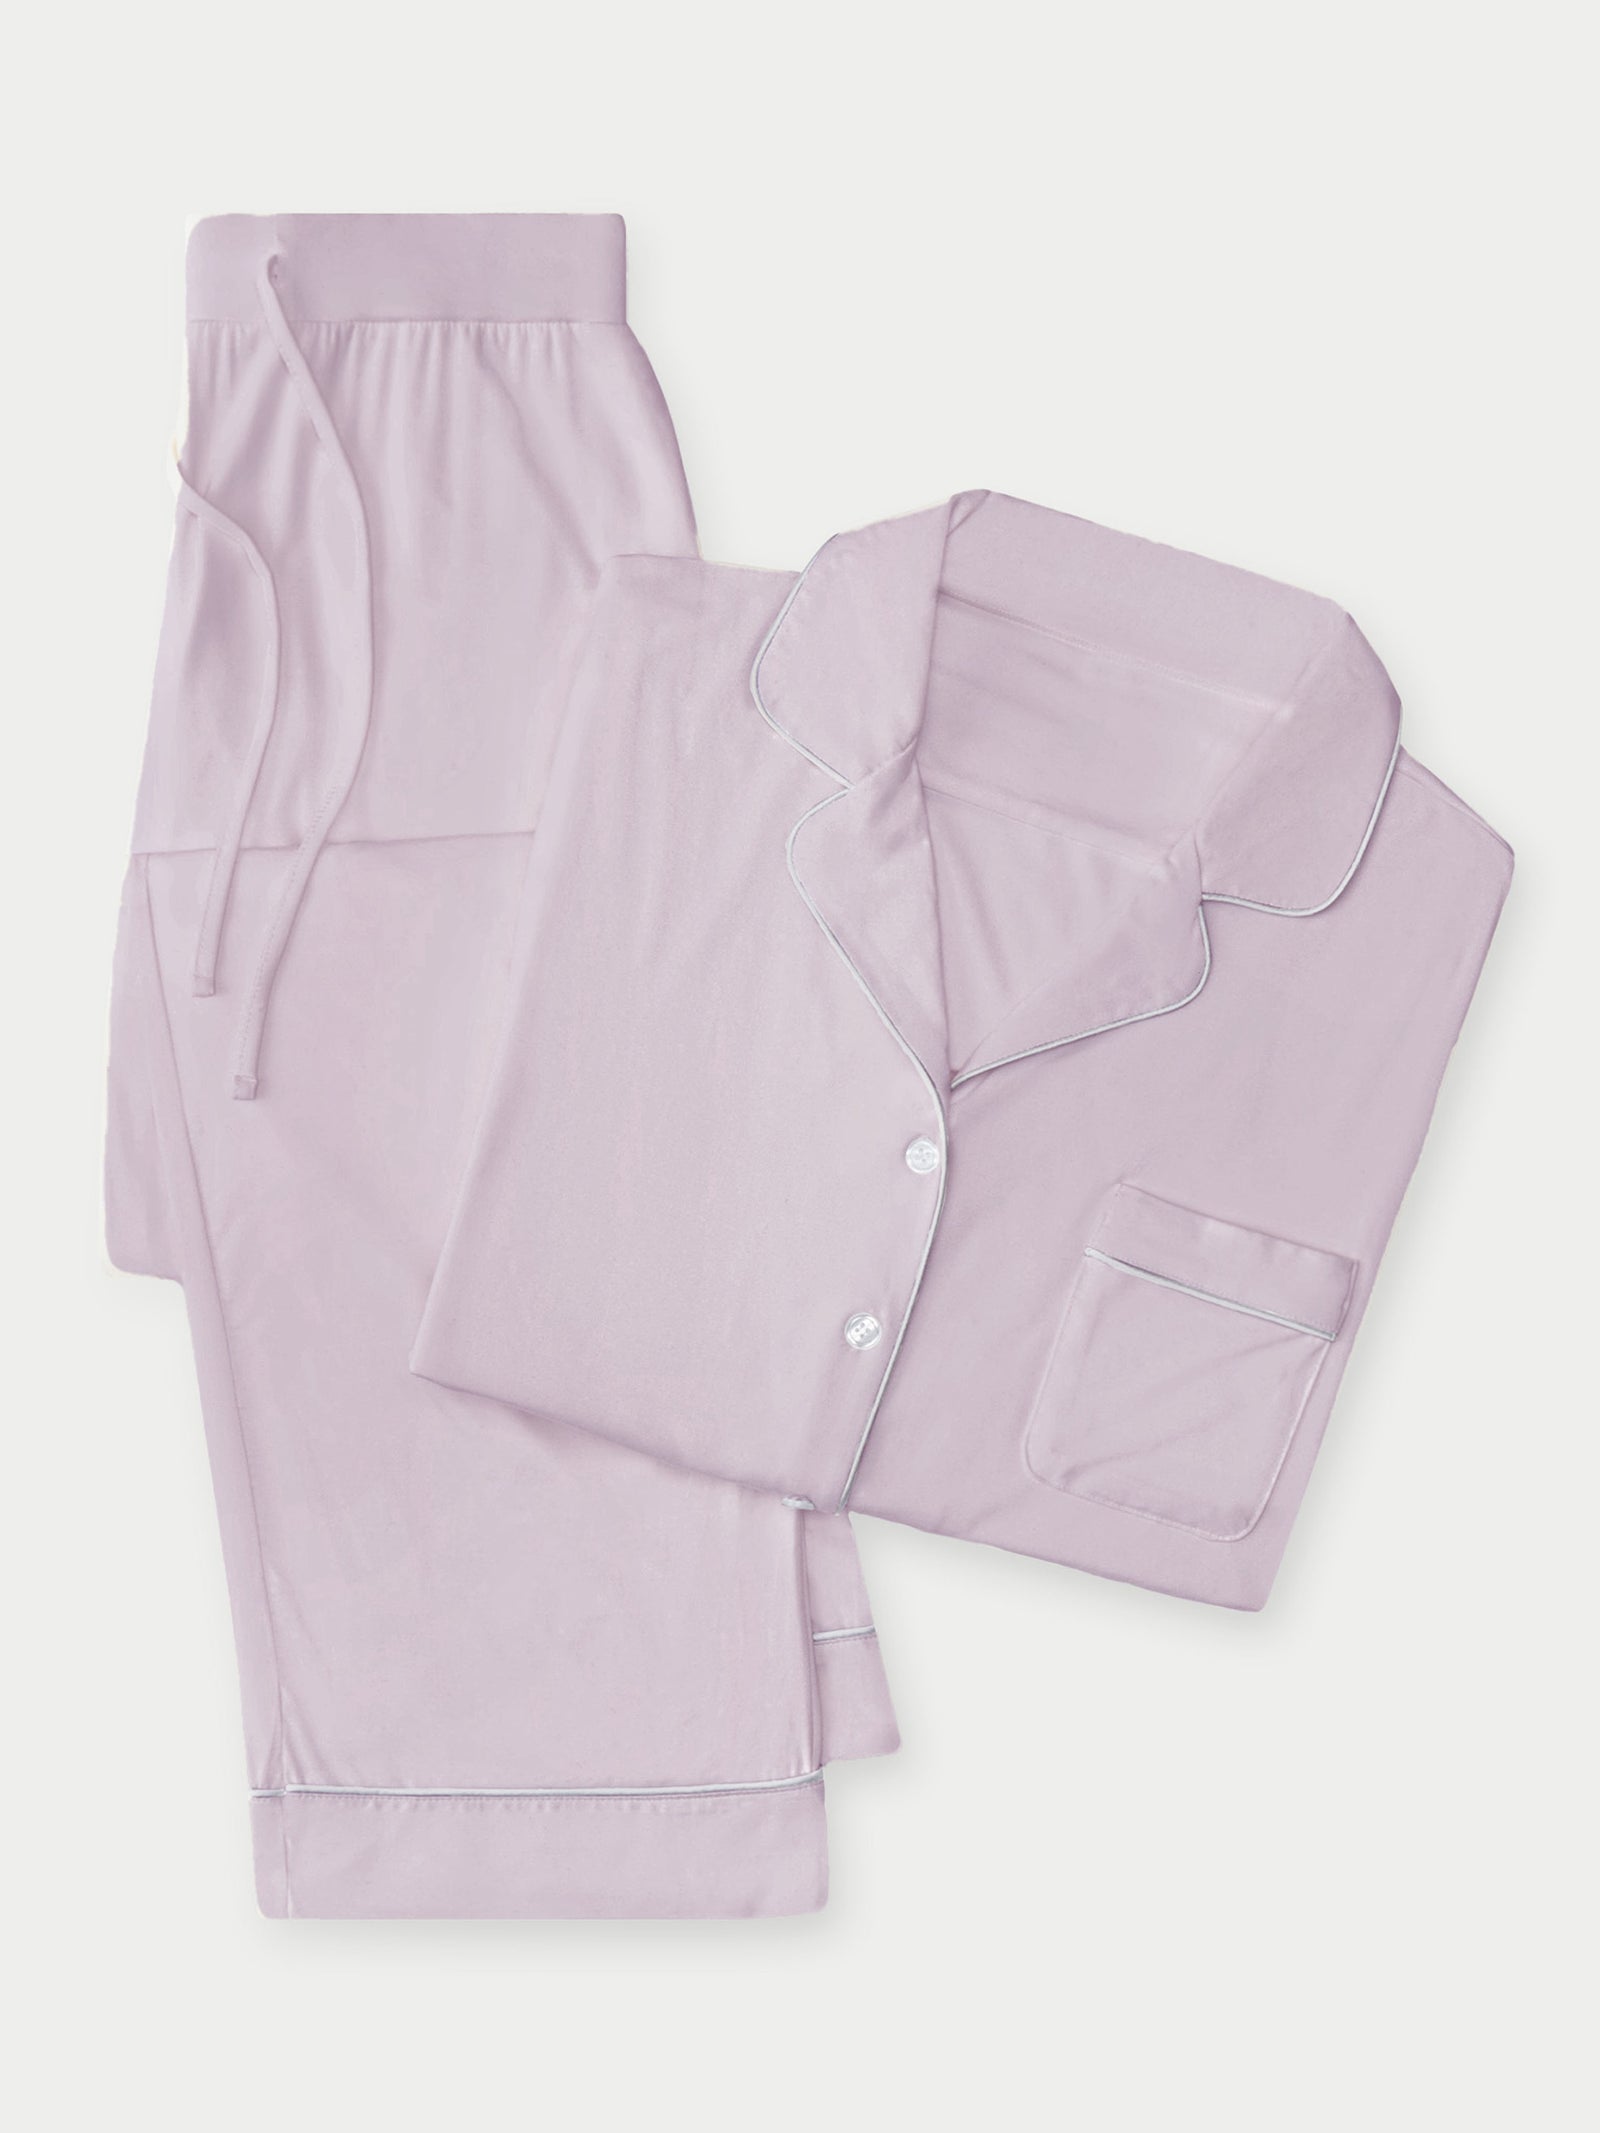 Lilac Long Sleeve Pajama Set. The photo was taken close up, showing off the print of the pajamas. 